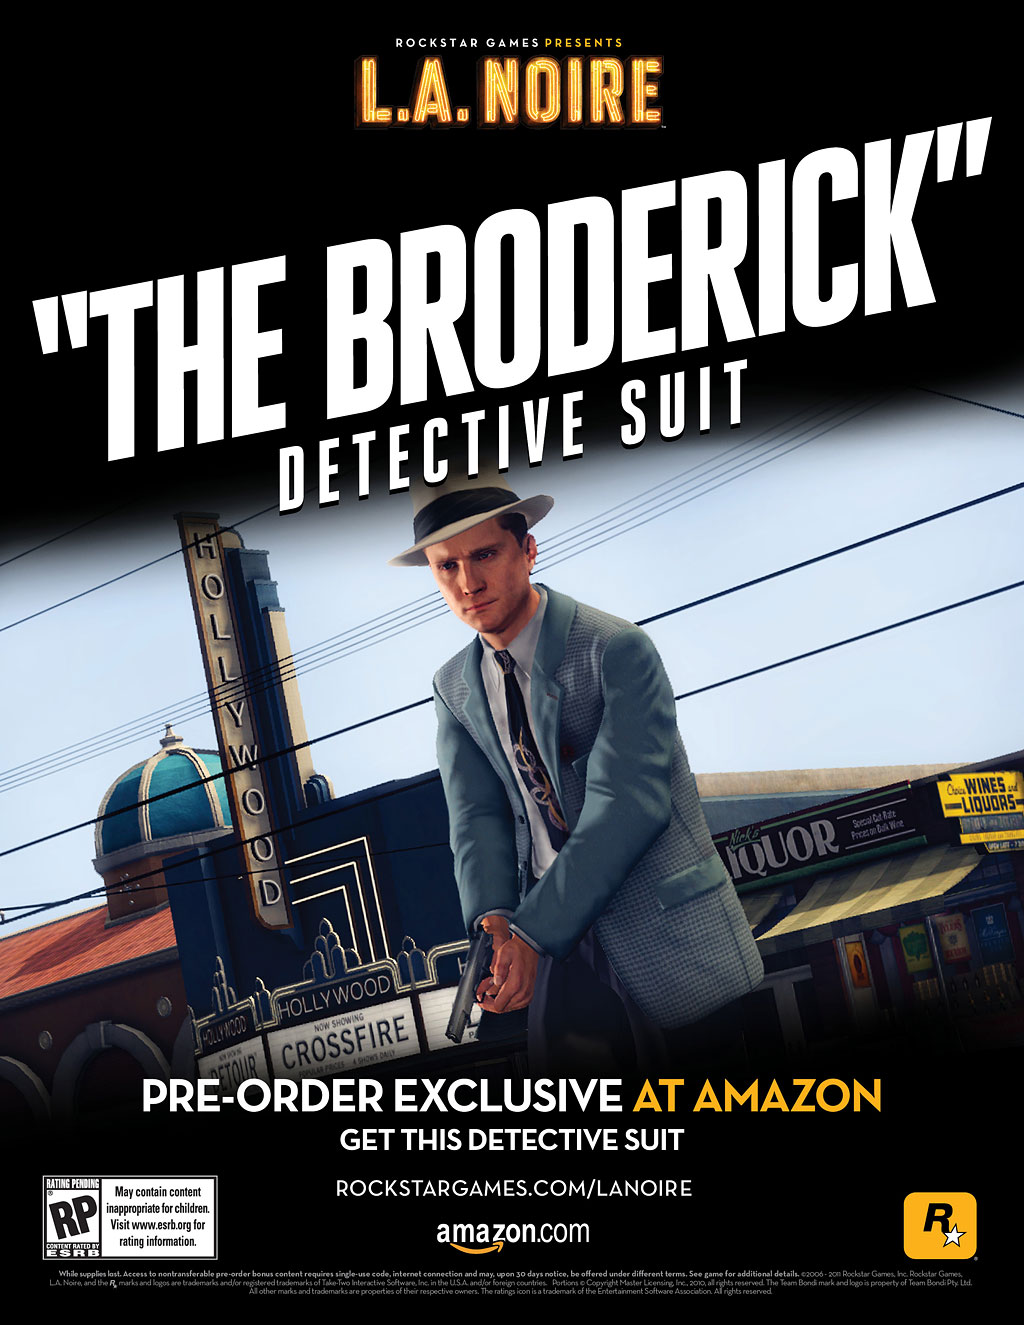 The Broderick is an outfit featured in L.A. Noire. 